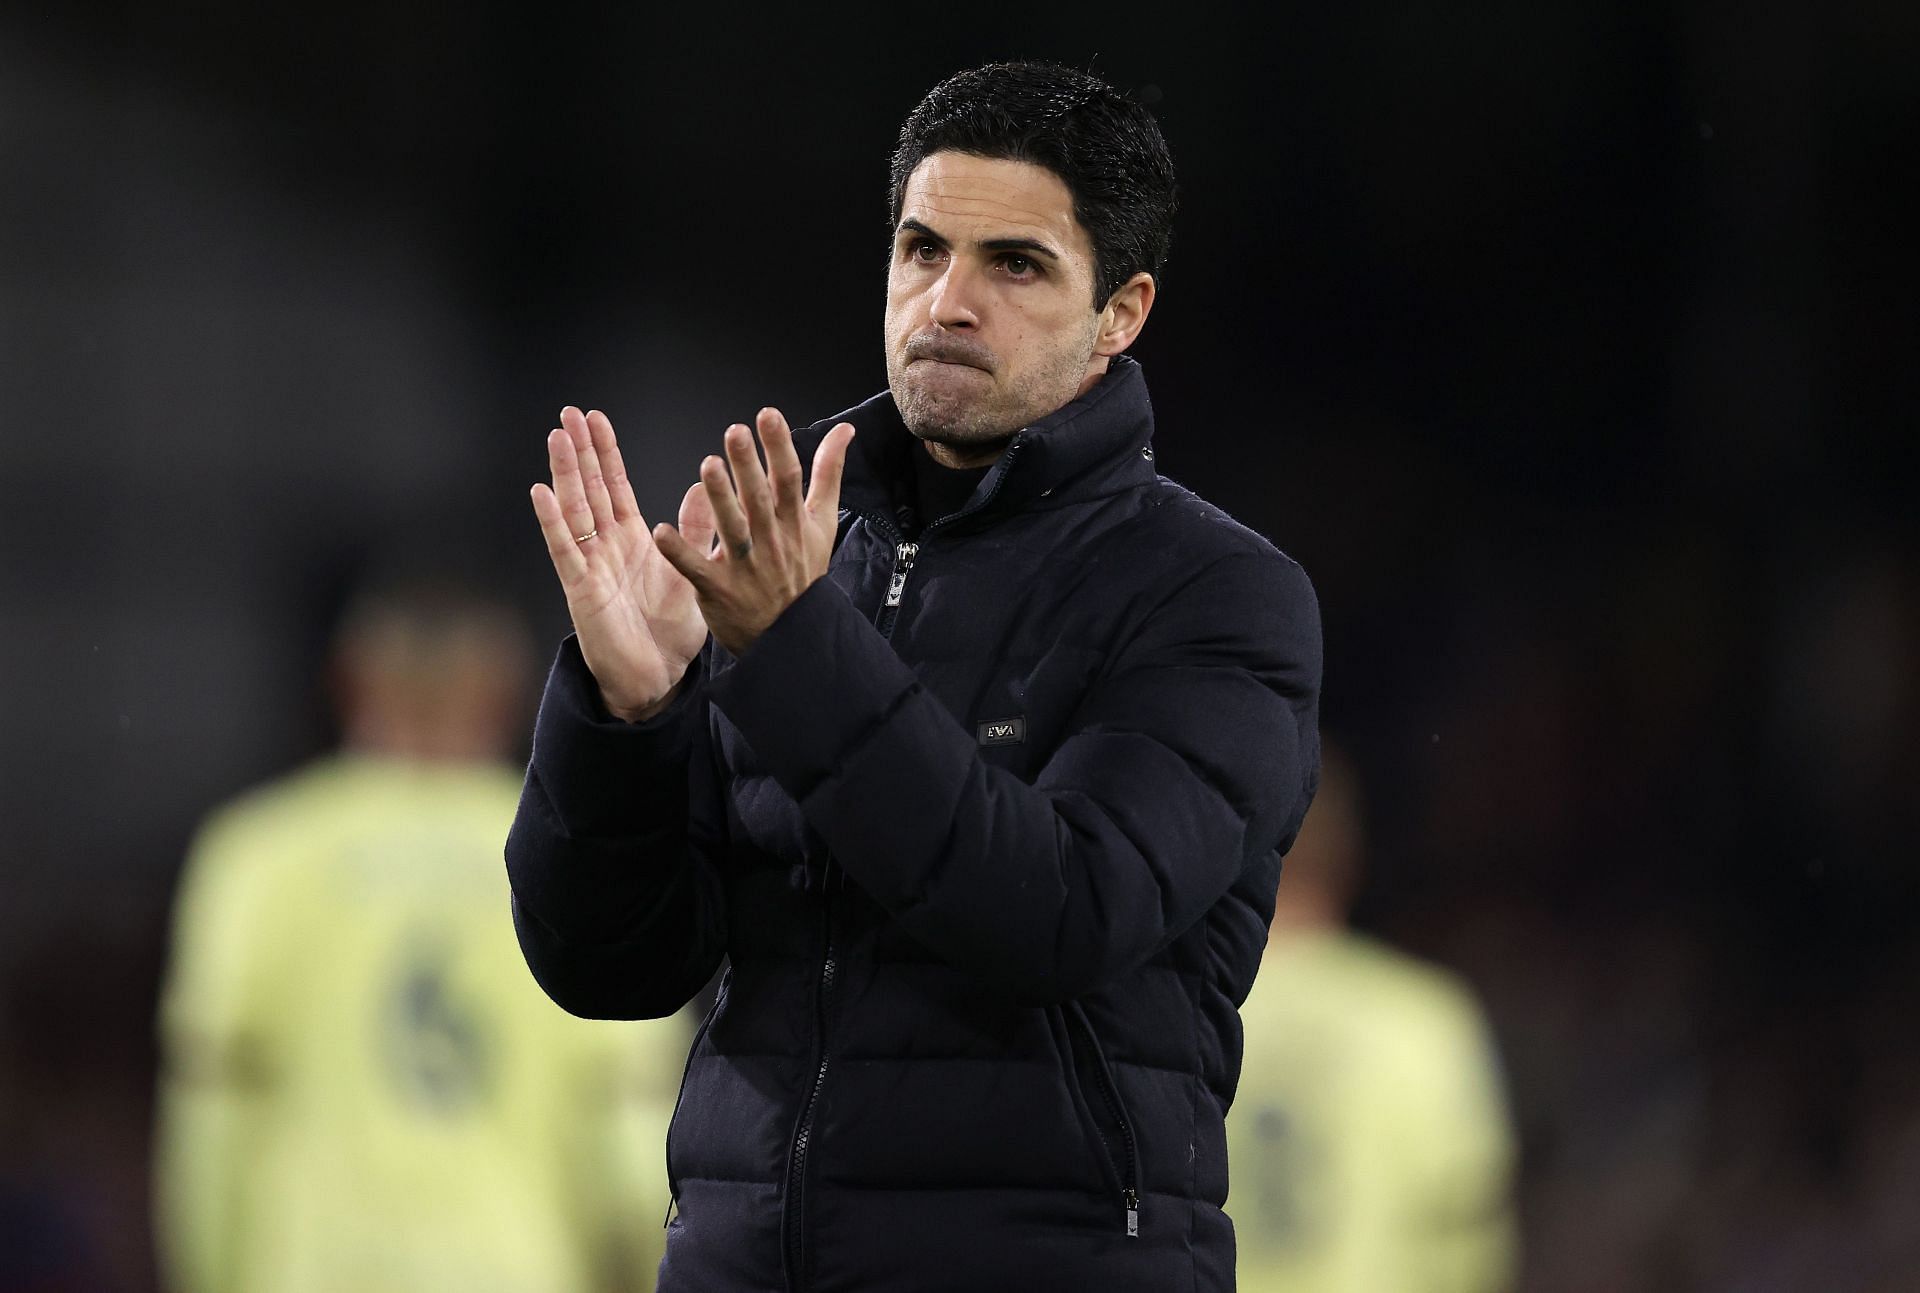 Arsenal manager Mikel Arteta is working to upgrade his squad this summer